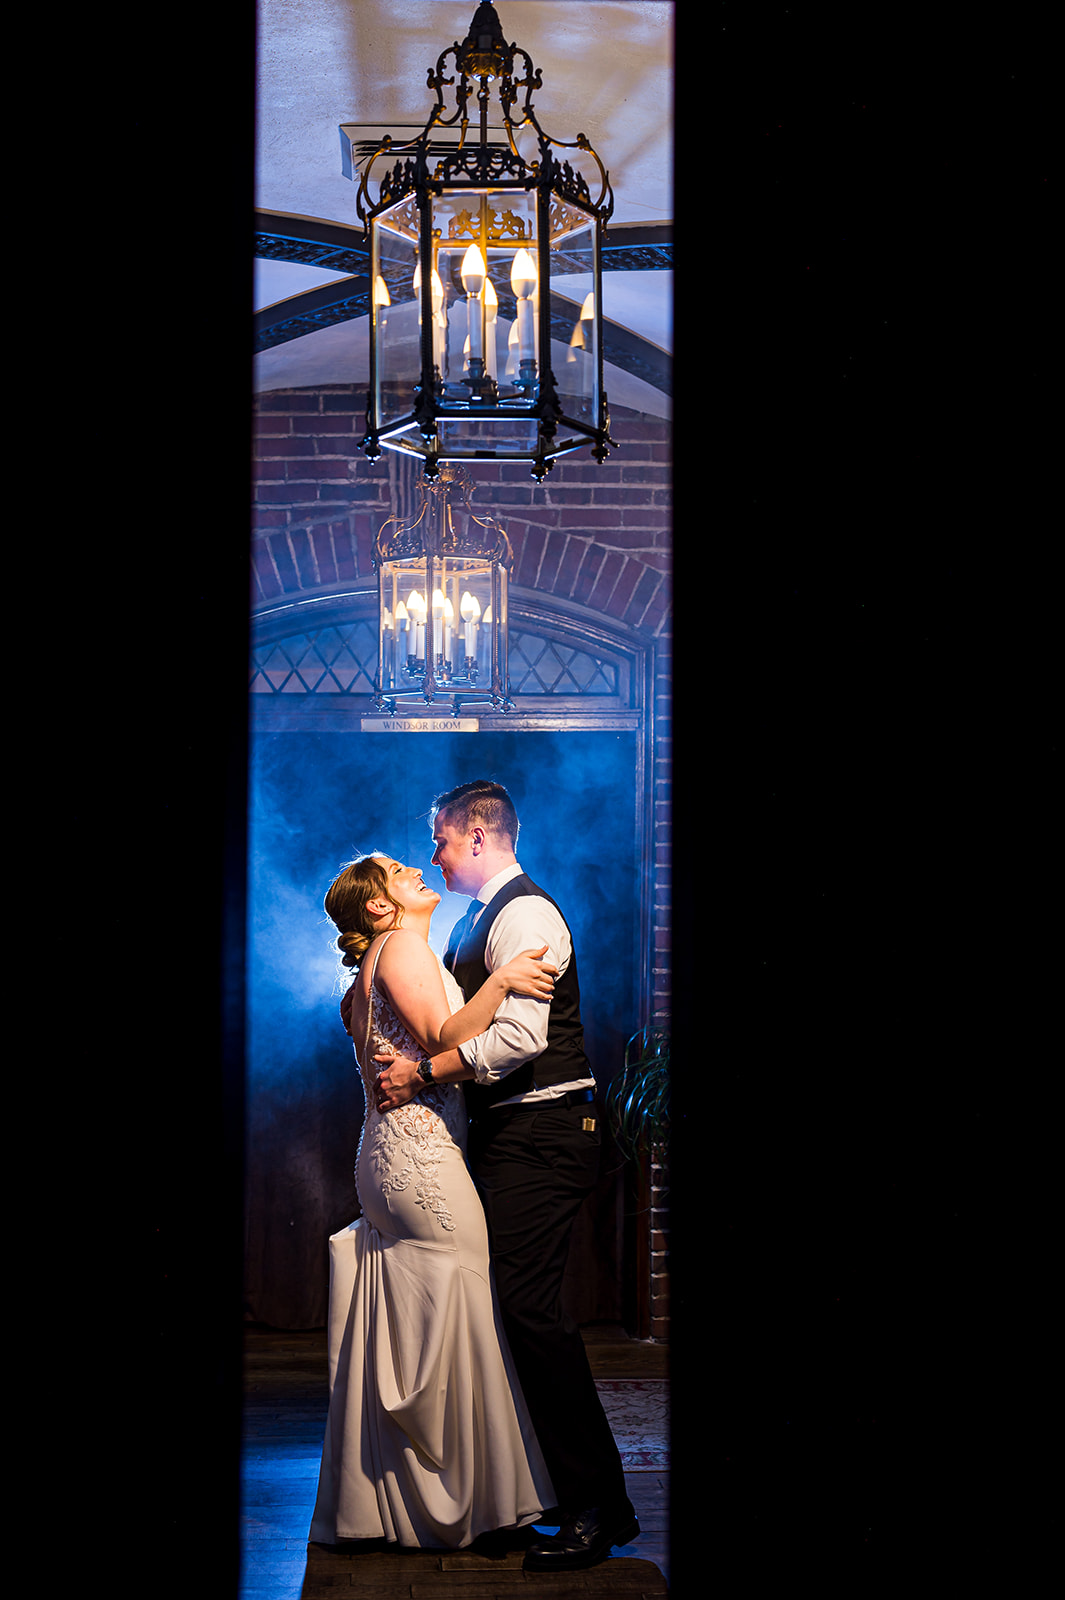 wellshire event center wedding couple with dreamy blue smoke behind them enbracing each other under chandelier